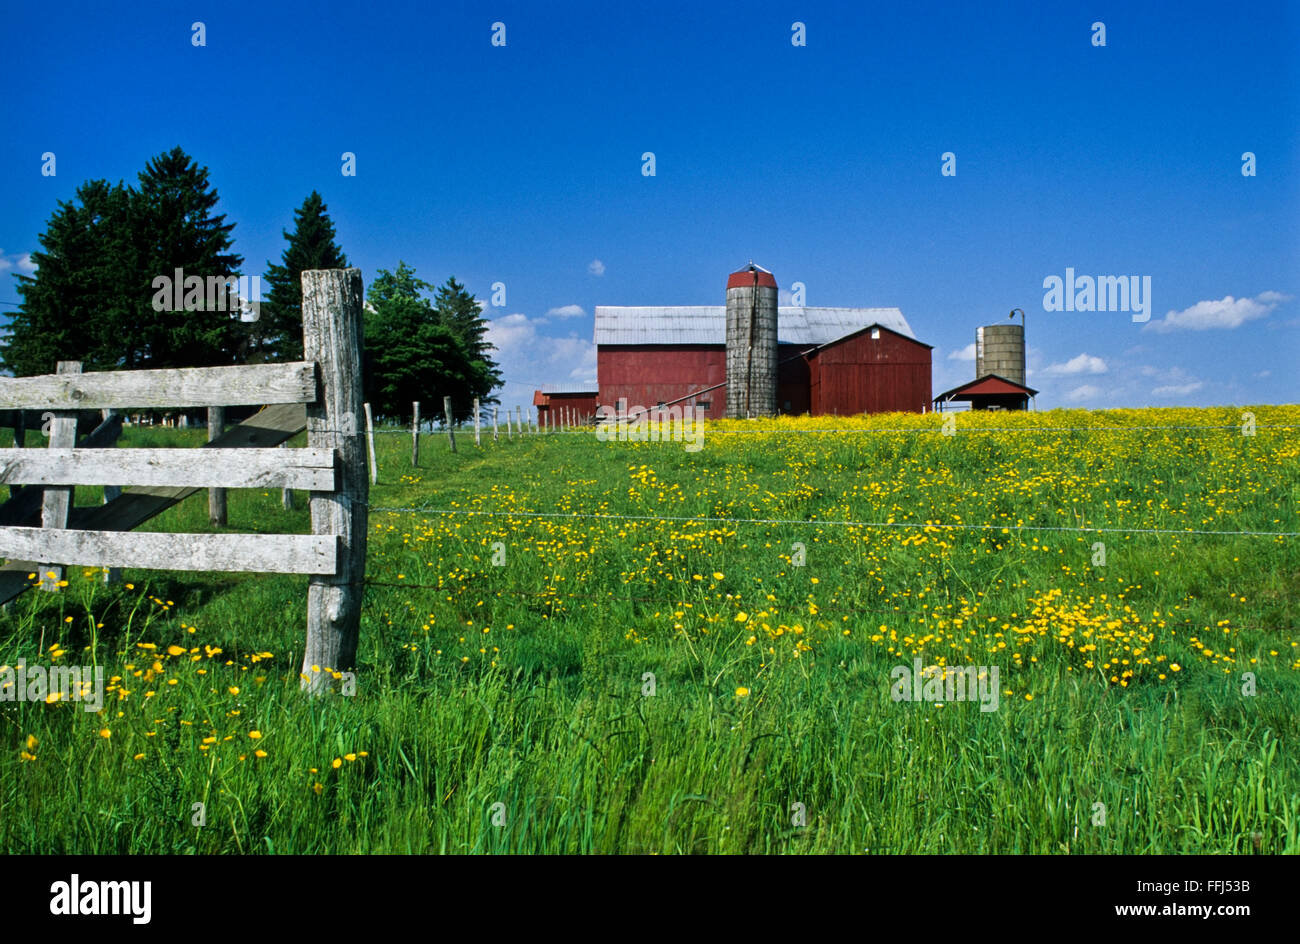 Red barn on a farm scene among yellow wildflowers in a meadow flowers and blue sky, Ohio, USA, US, Amish farm country meadows wild flowers Stock Photo